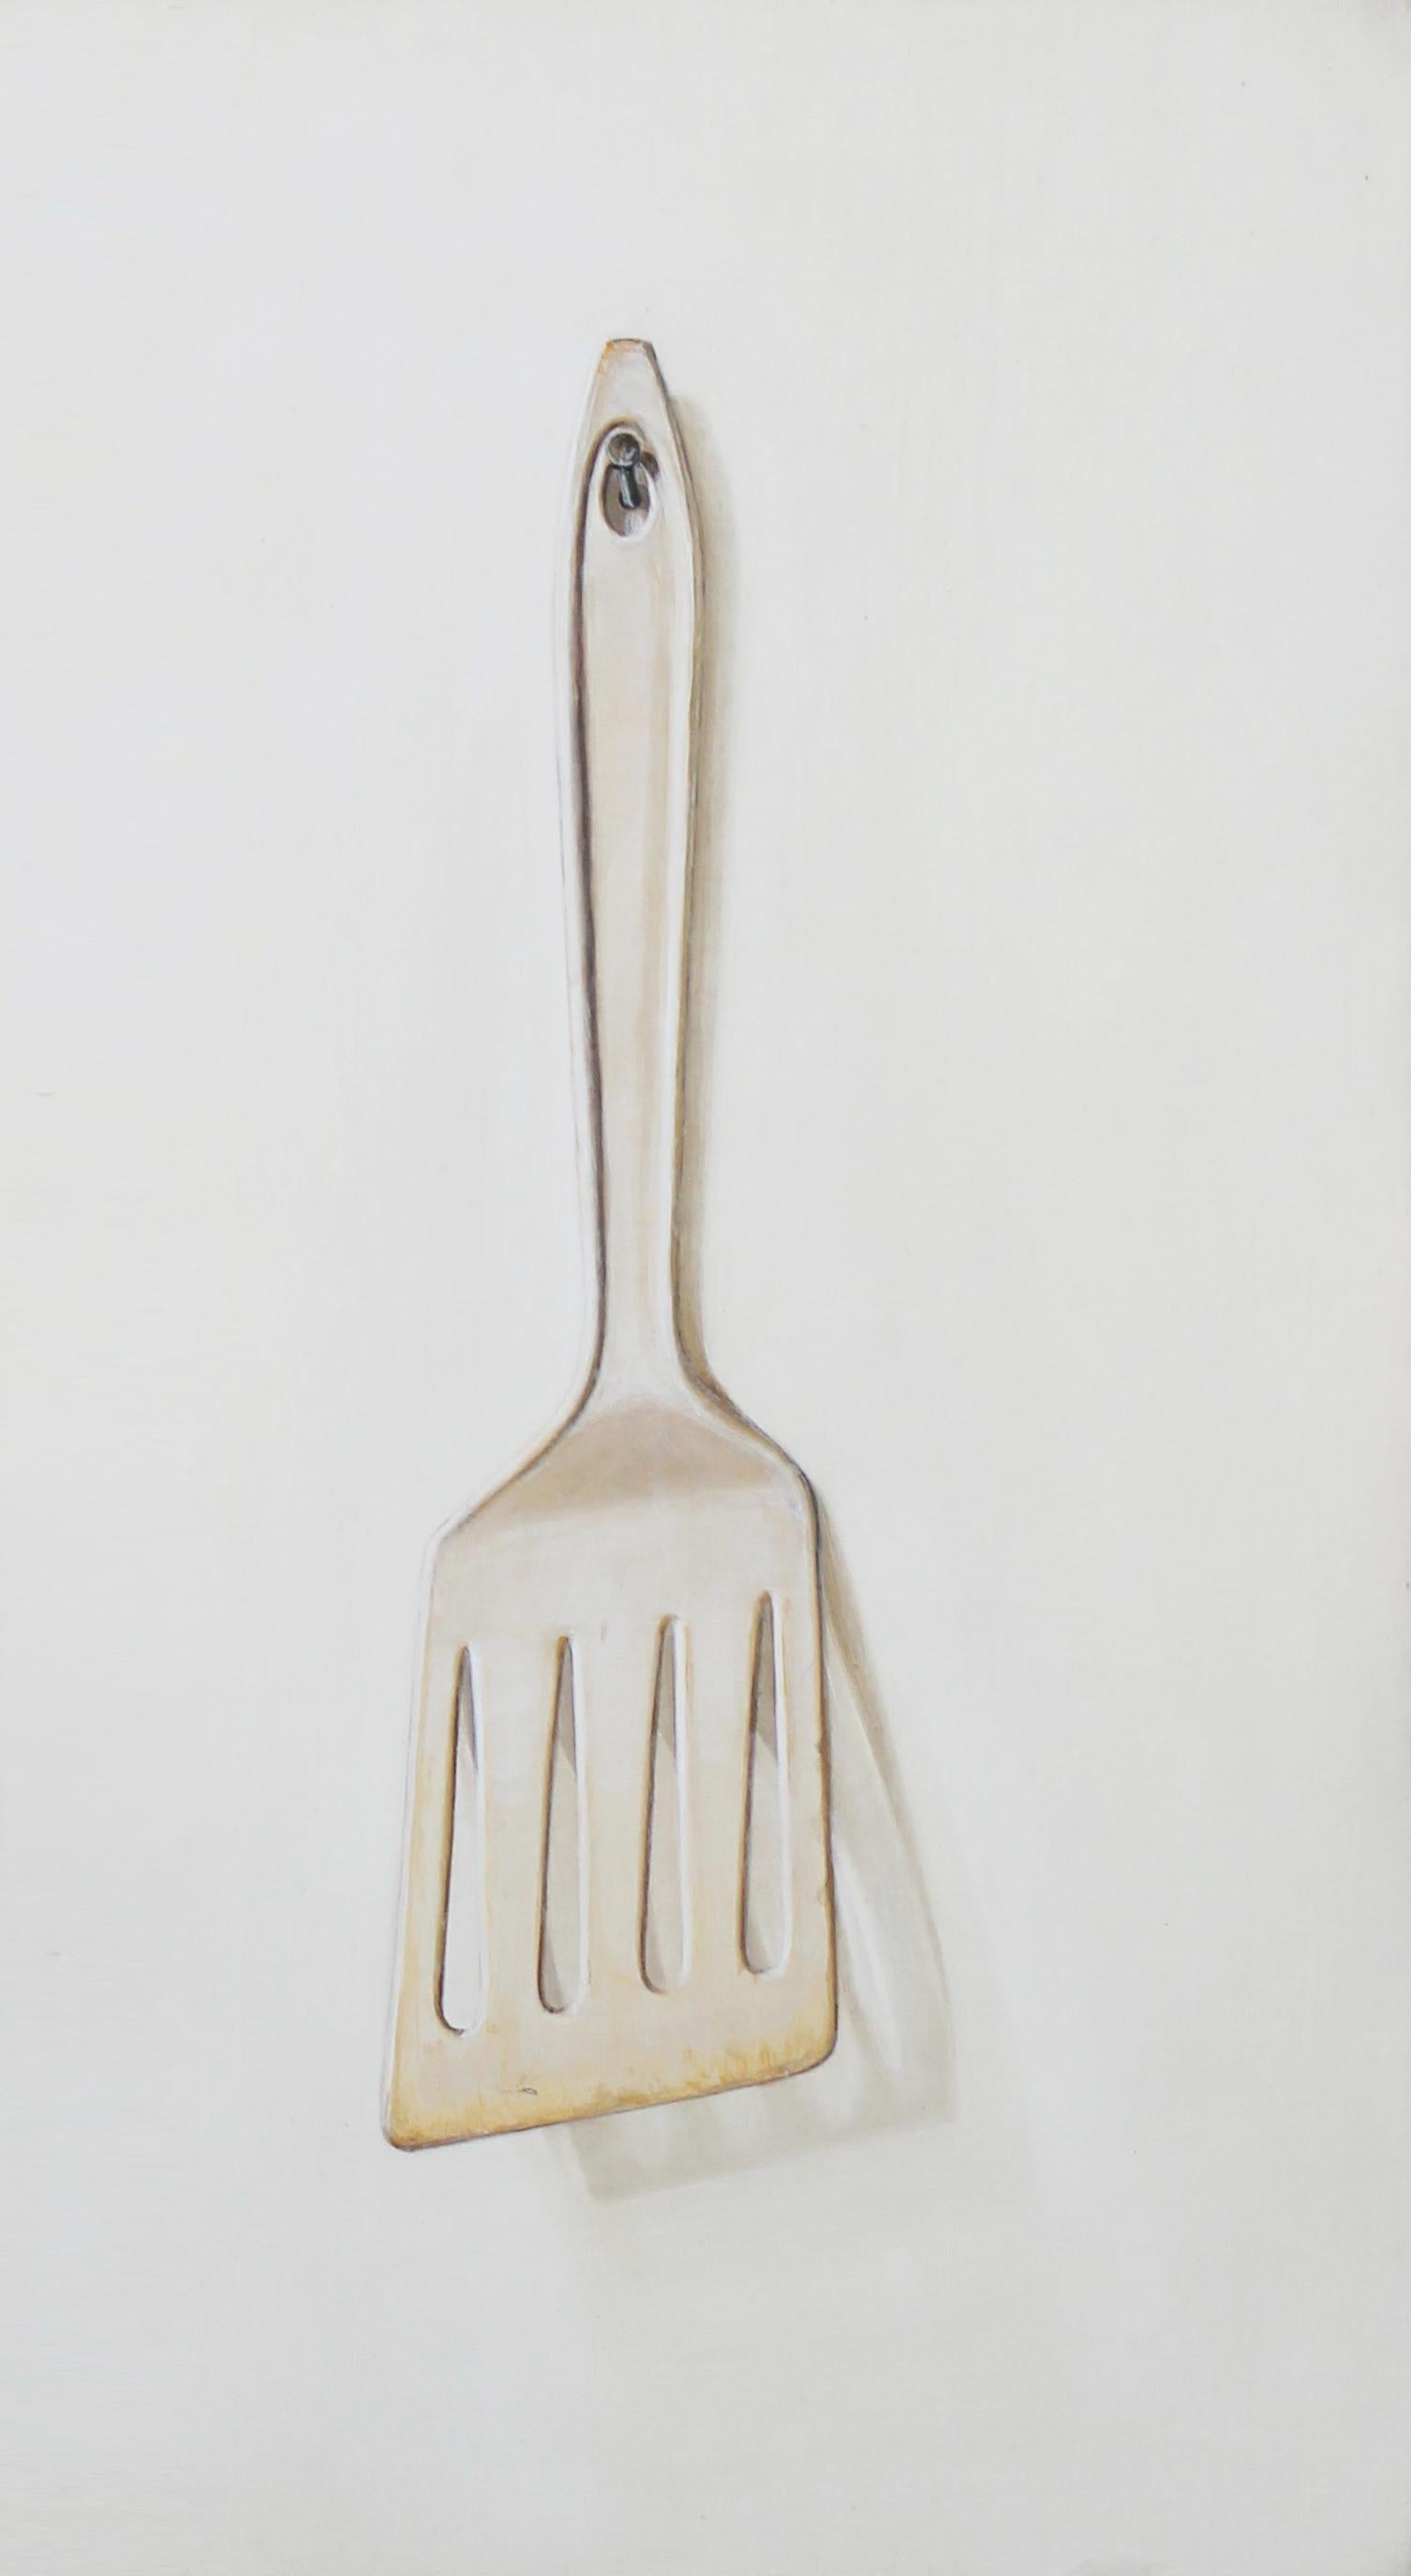 Spatula - Painting by Holly Farrell